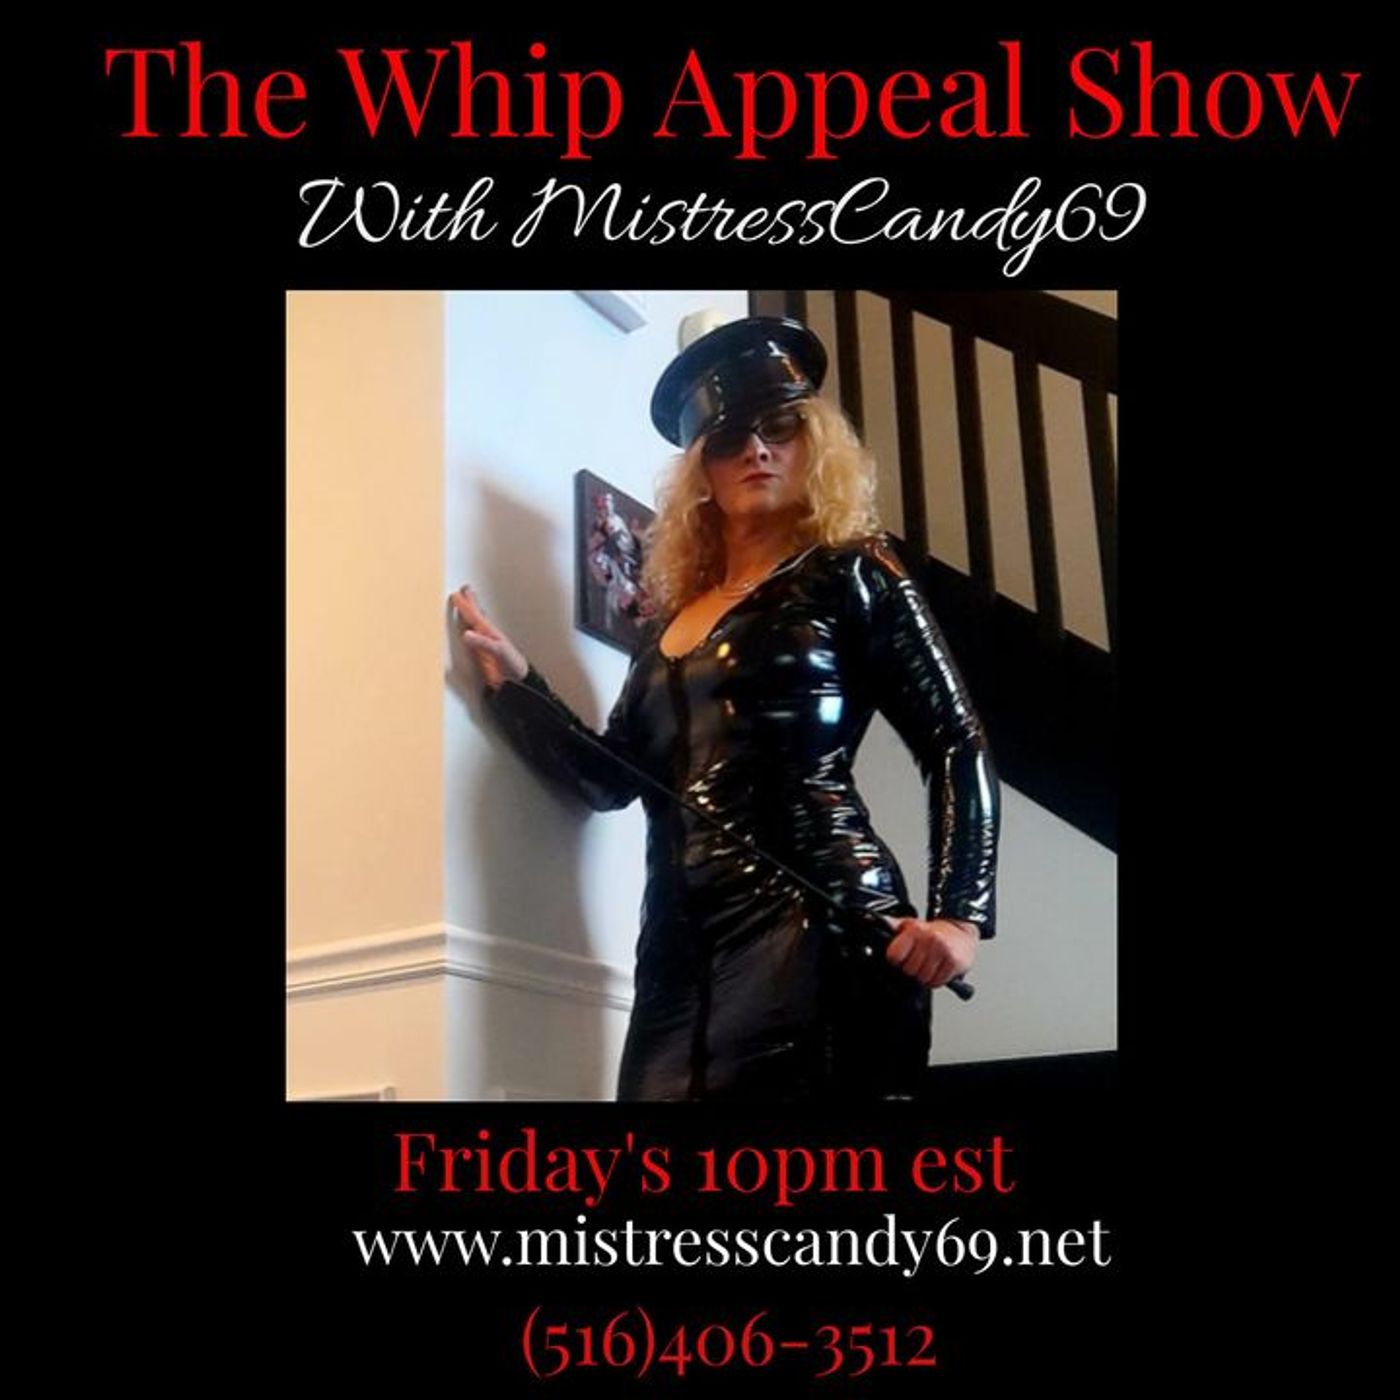 11/18/2022 The Whip Appeal Show- MistressCandy69